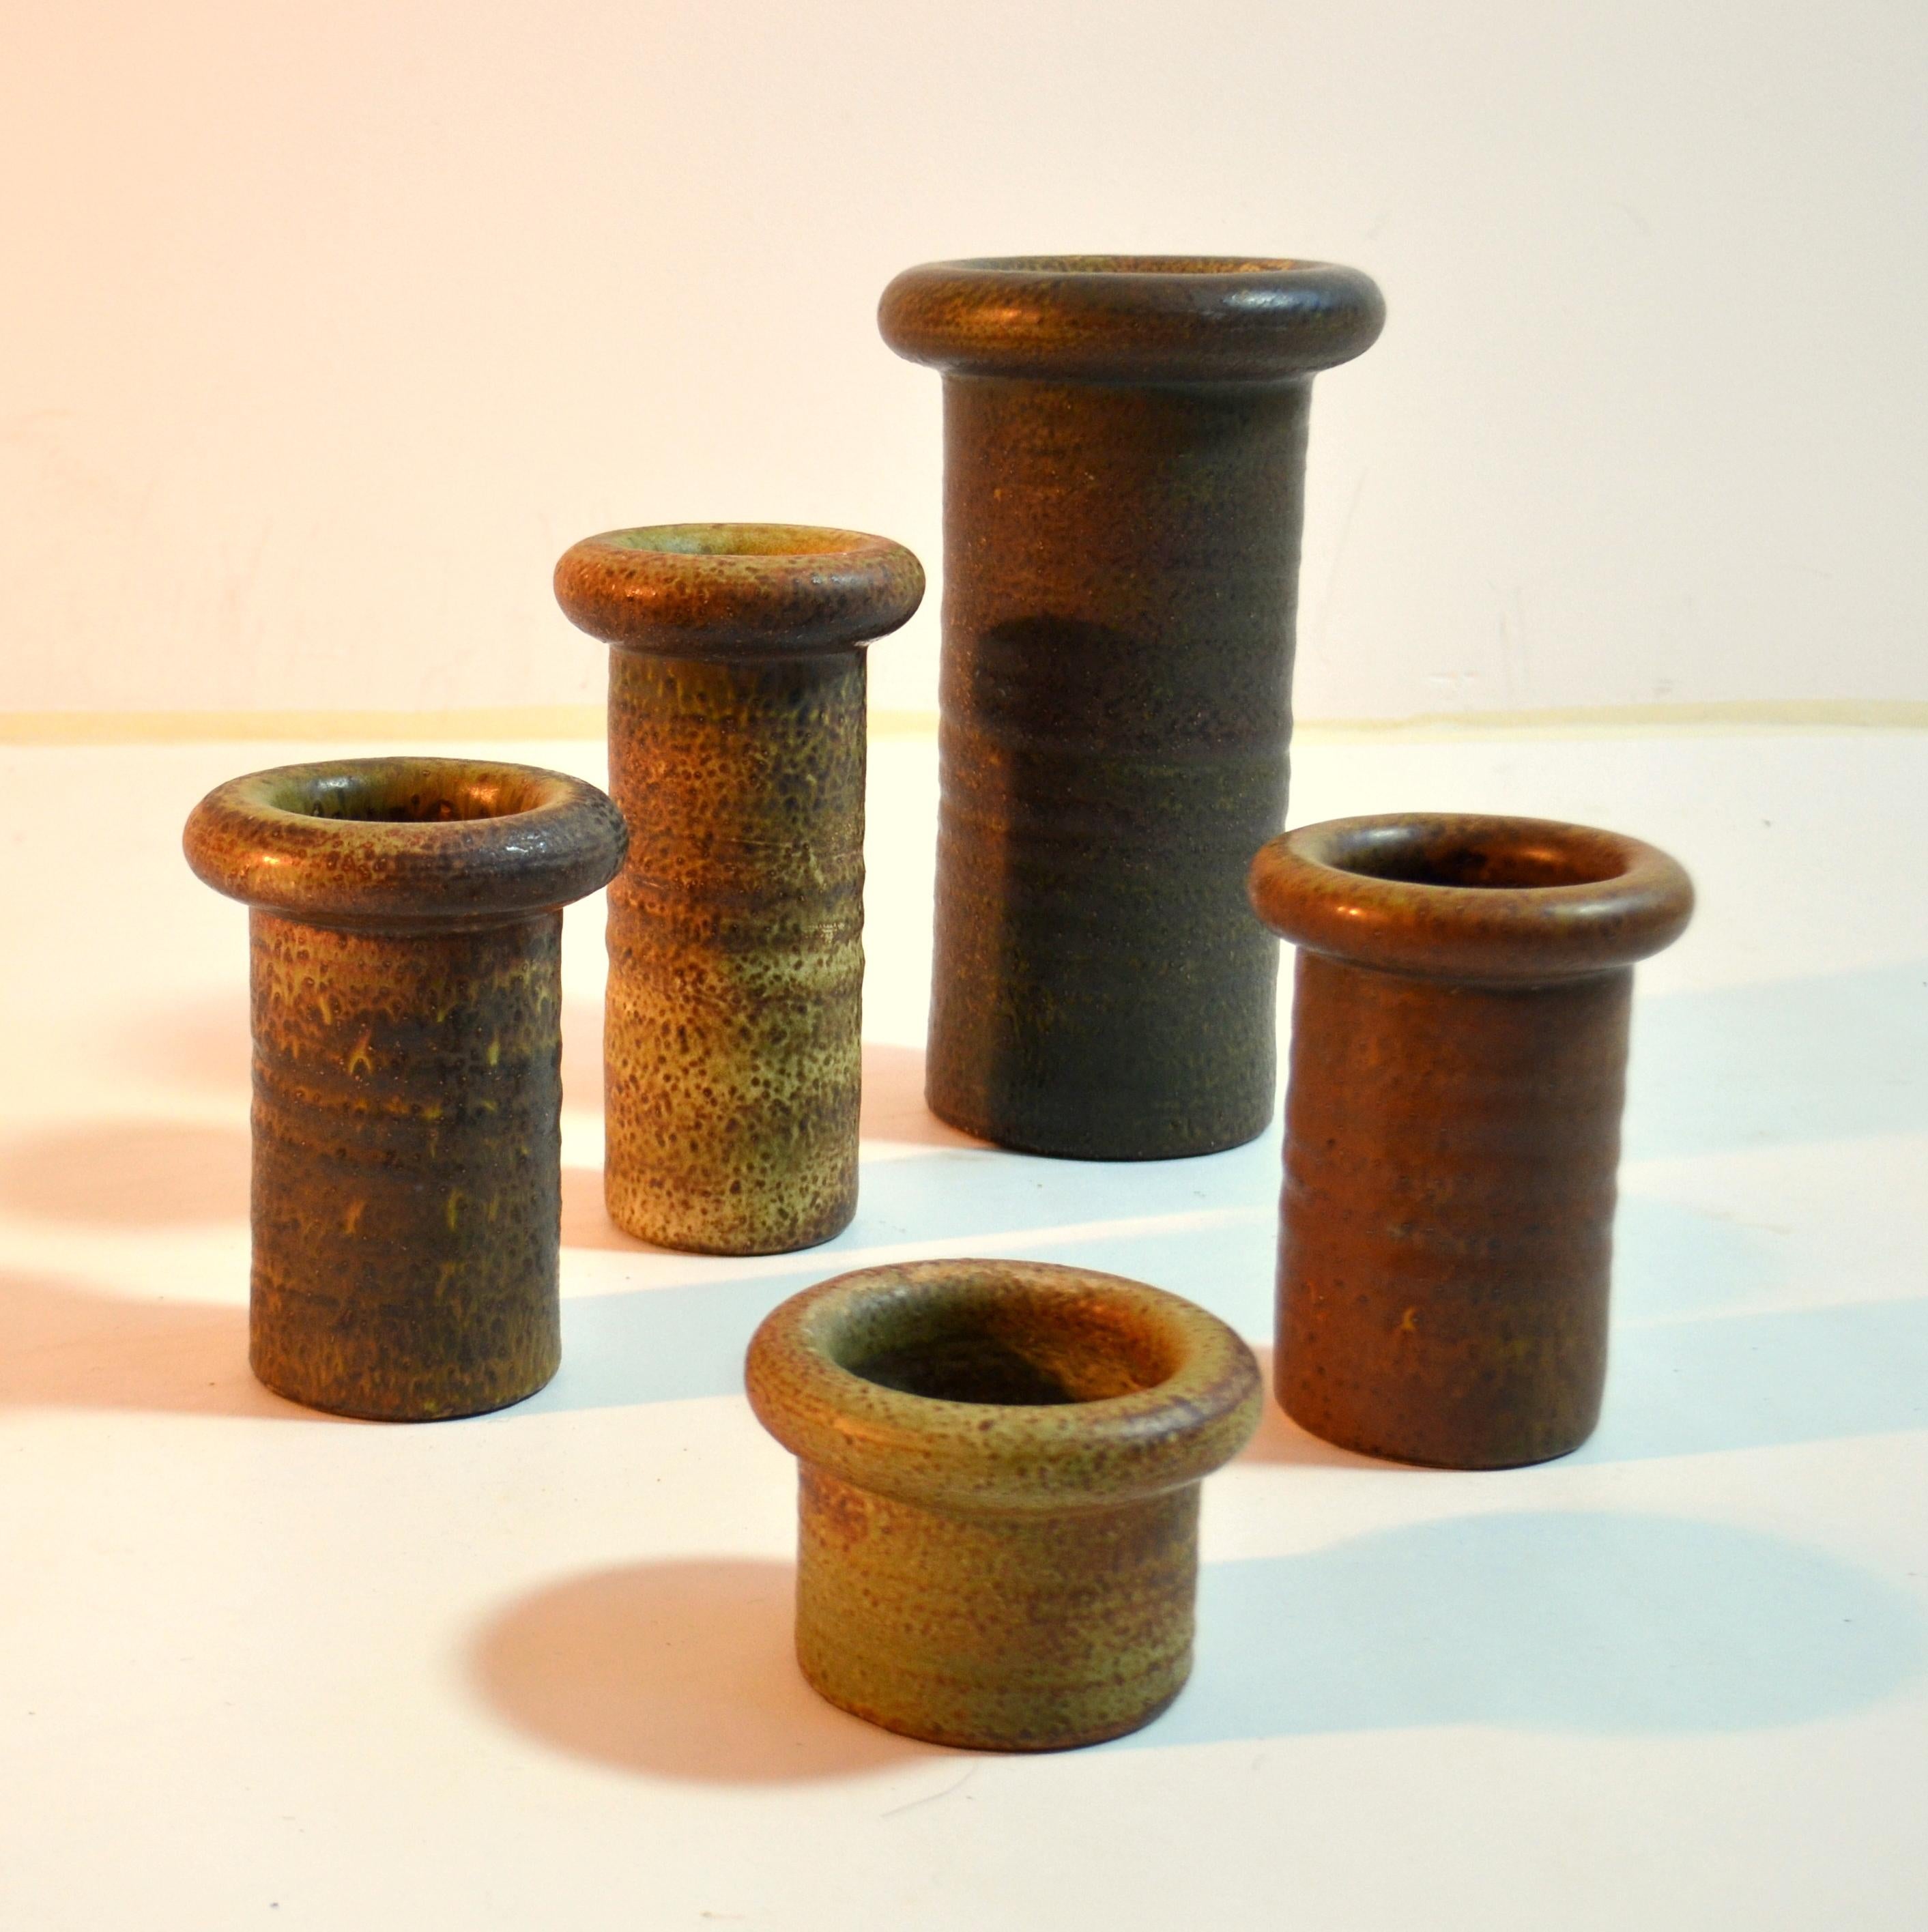 A collection of five rolled neck cylinder vases in differing heights with earth tone and glazes in muted tones, all created on the turning wheel by highly technical skilled master potter Piet Knepper, the Dutch Mobach ceramist in the 1960's. All the